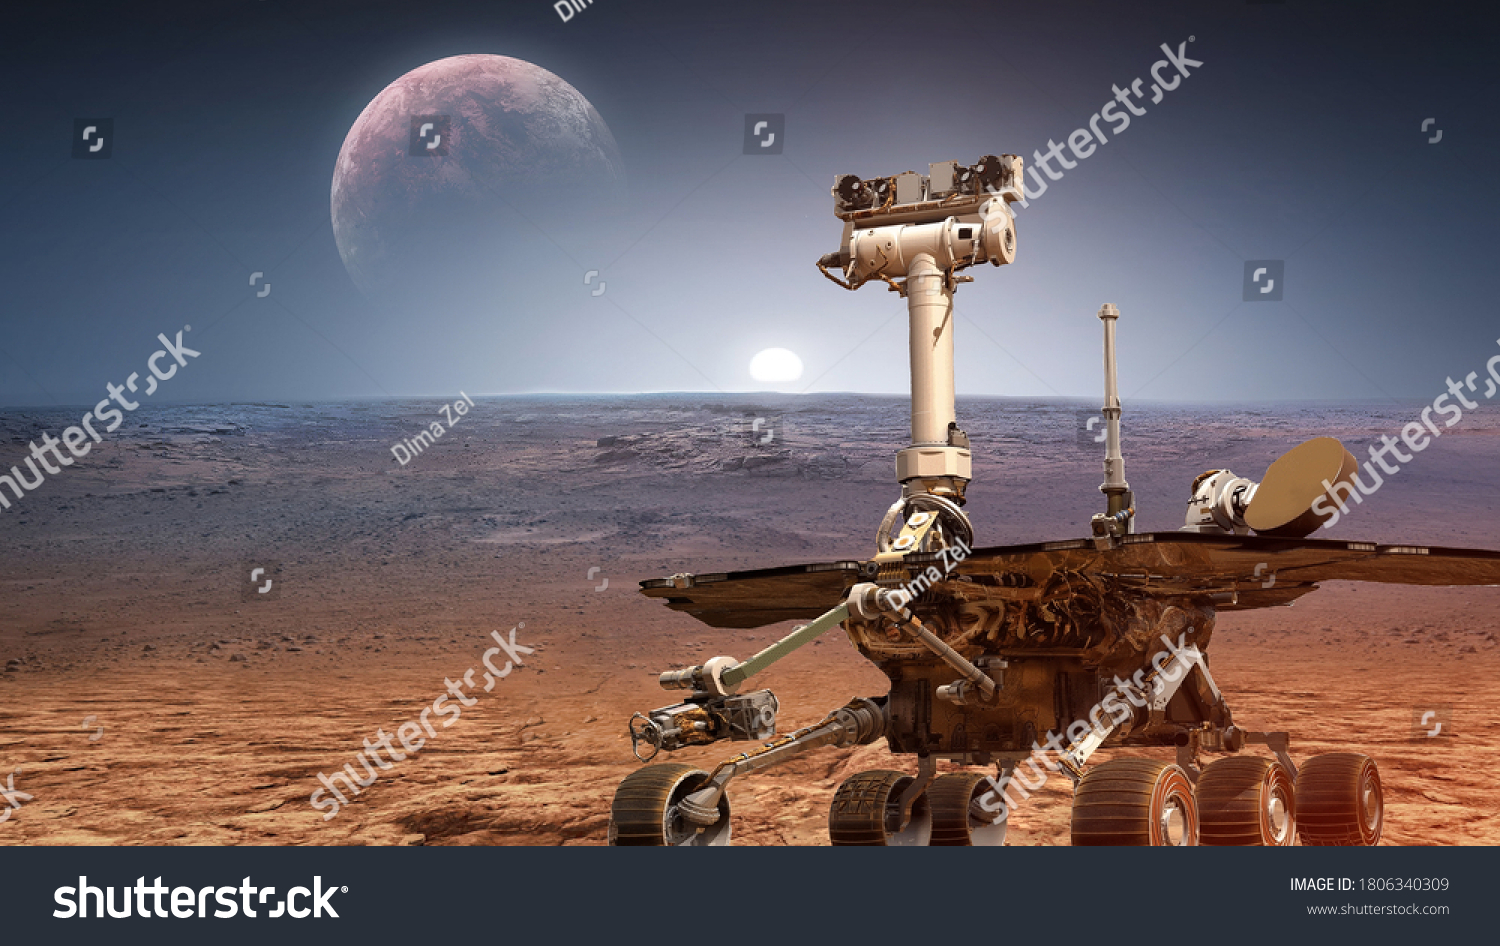 Martian rover Curiosity on surface of red planet Mars. Research of red planet. Perseverance 2020 rover. Elements of this image furnished by NASA #1806340309